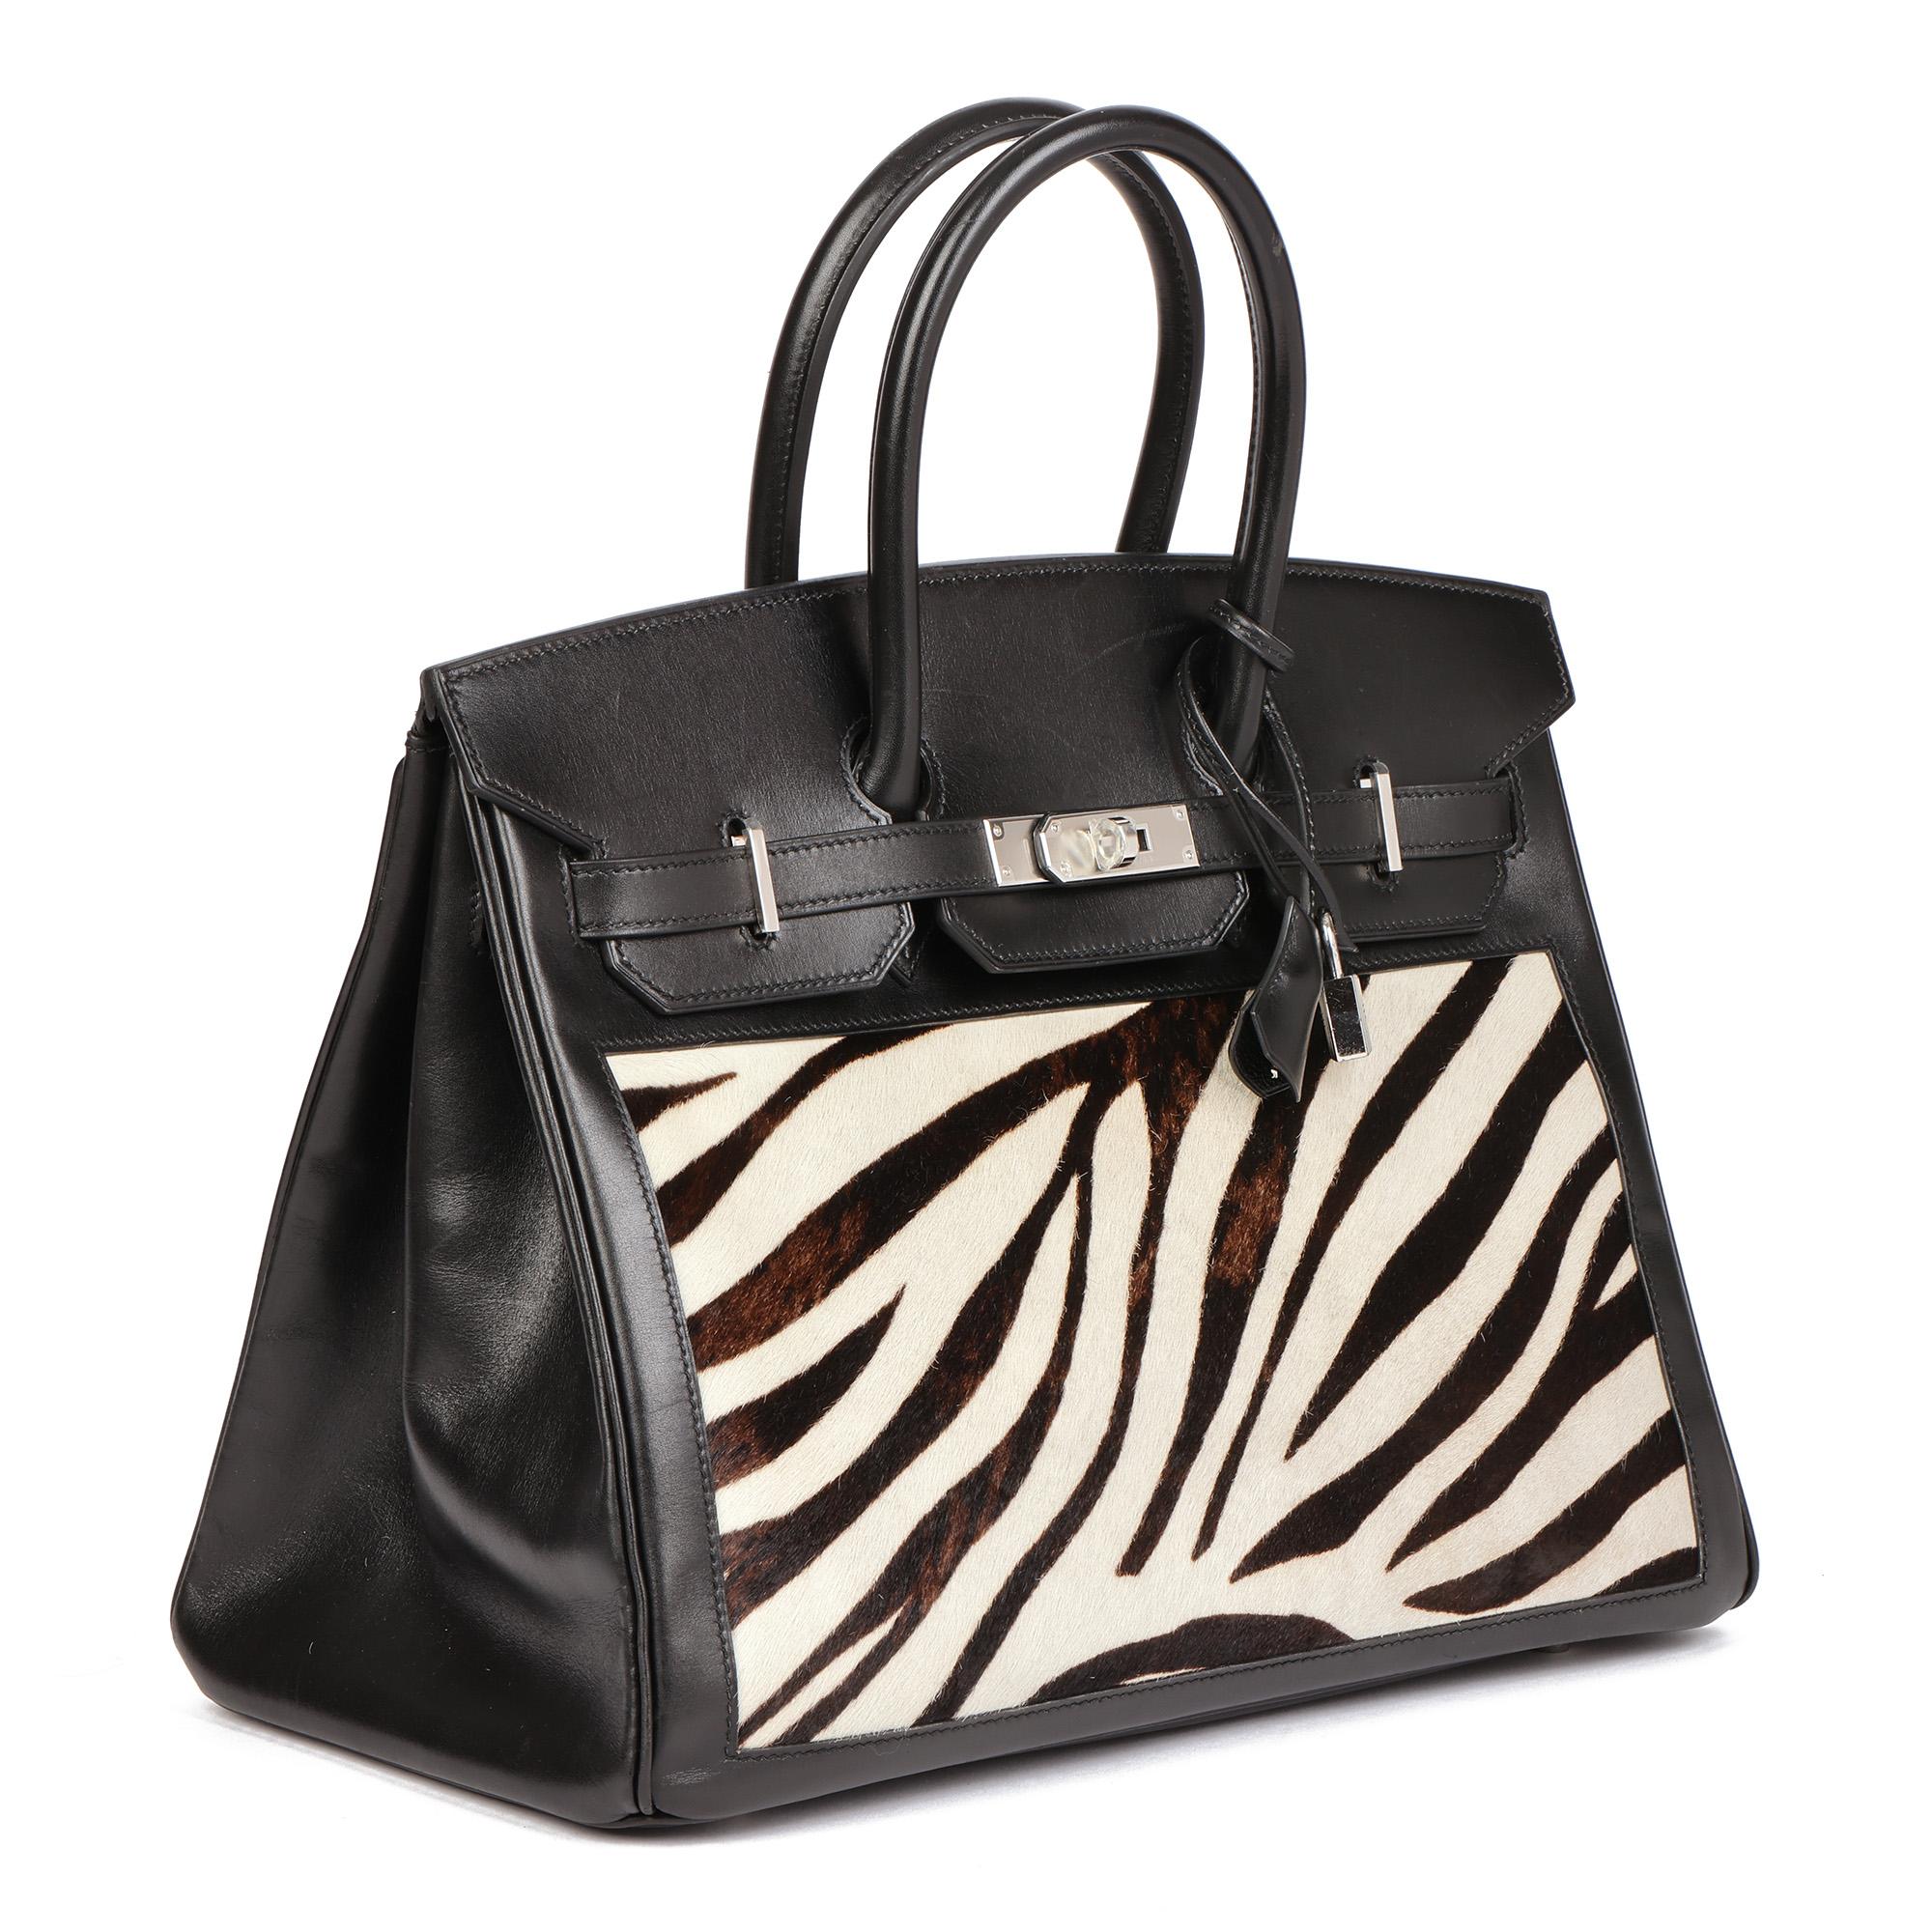 Hermès Black Box Calf Leather & Zebra Print Calfskin Pony Fur Birkin 35cm Retourne

CONDITION NOTES
The exterior is in very good condition with light signs of use and surface scratches throughout the leather. The pony fur calfskin has thinned on the